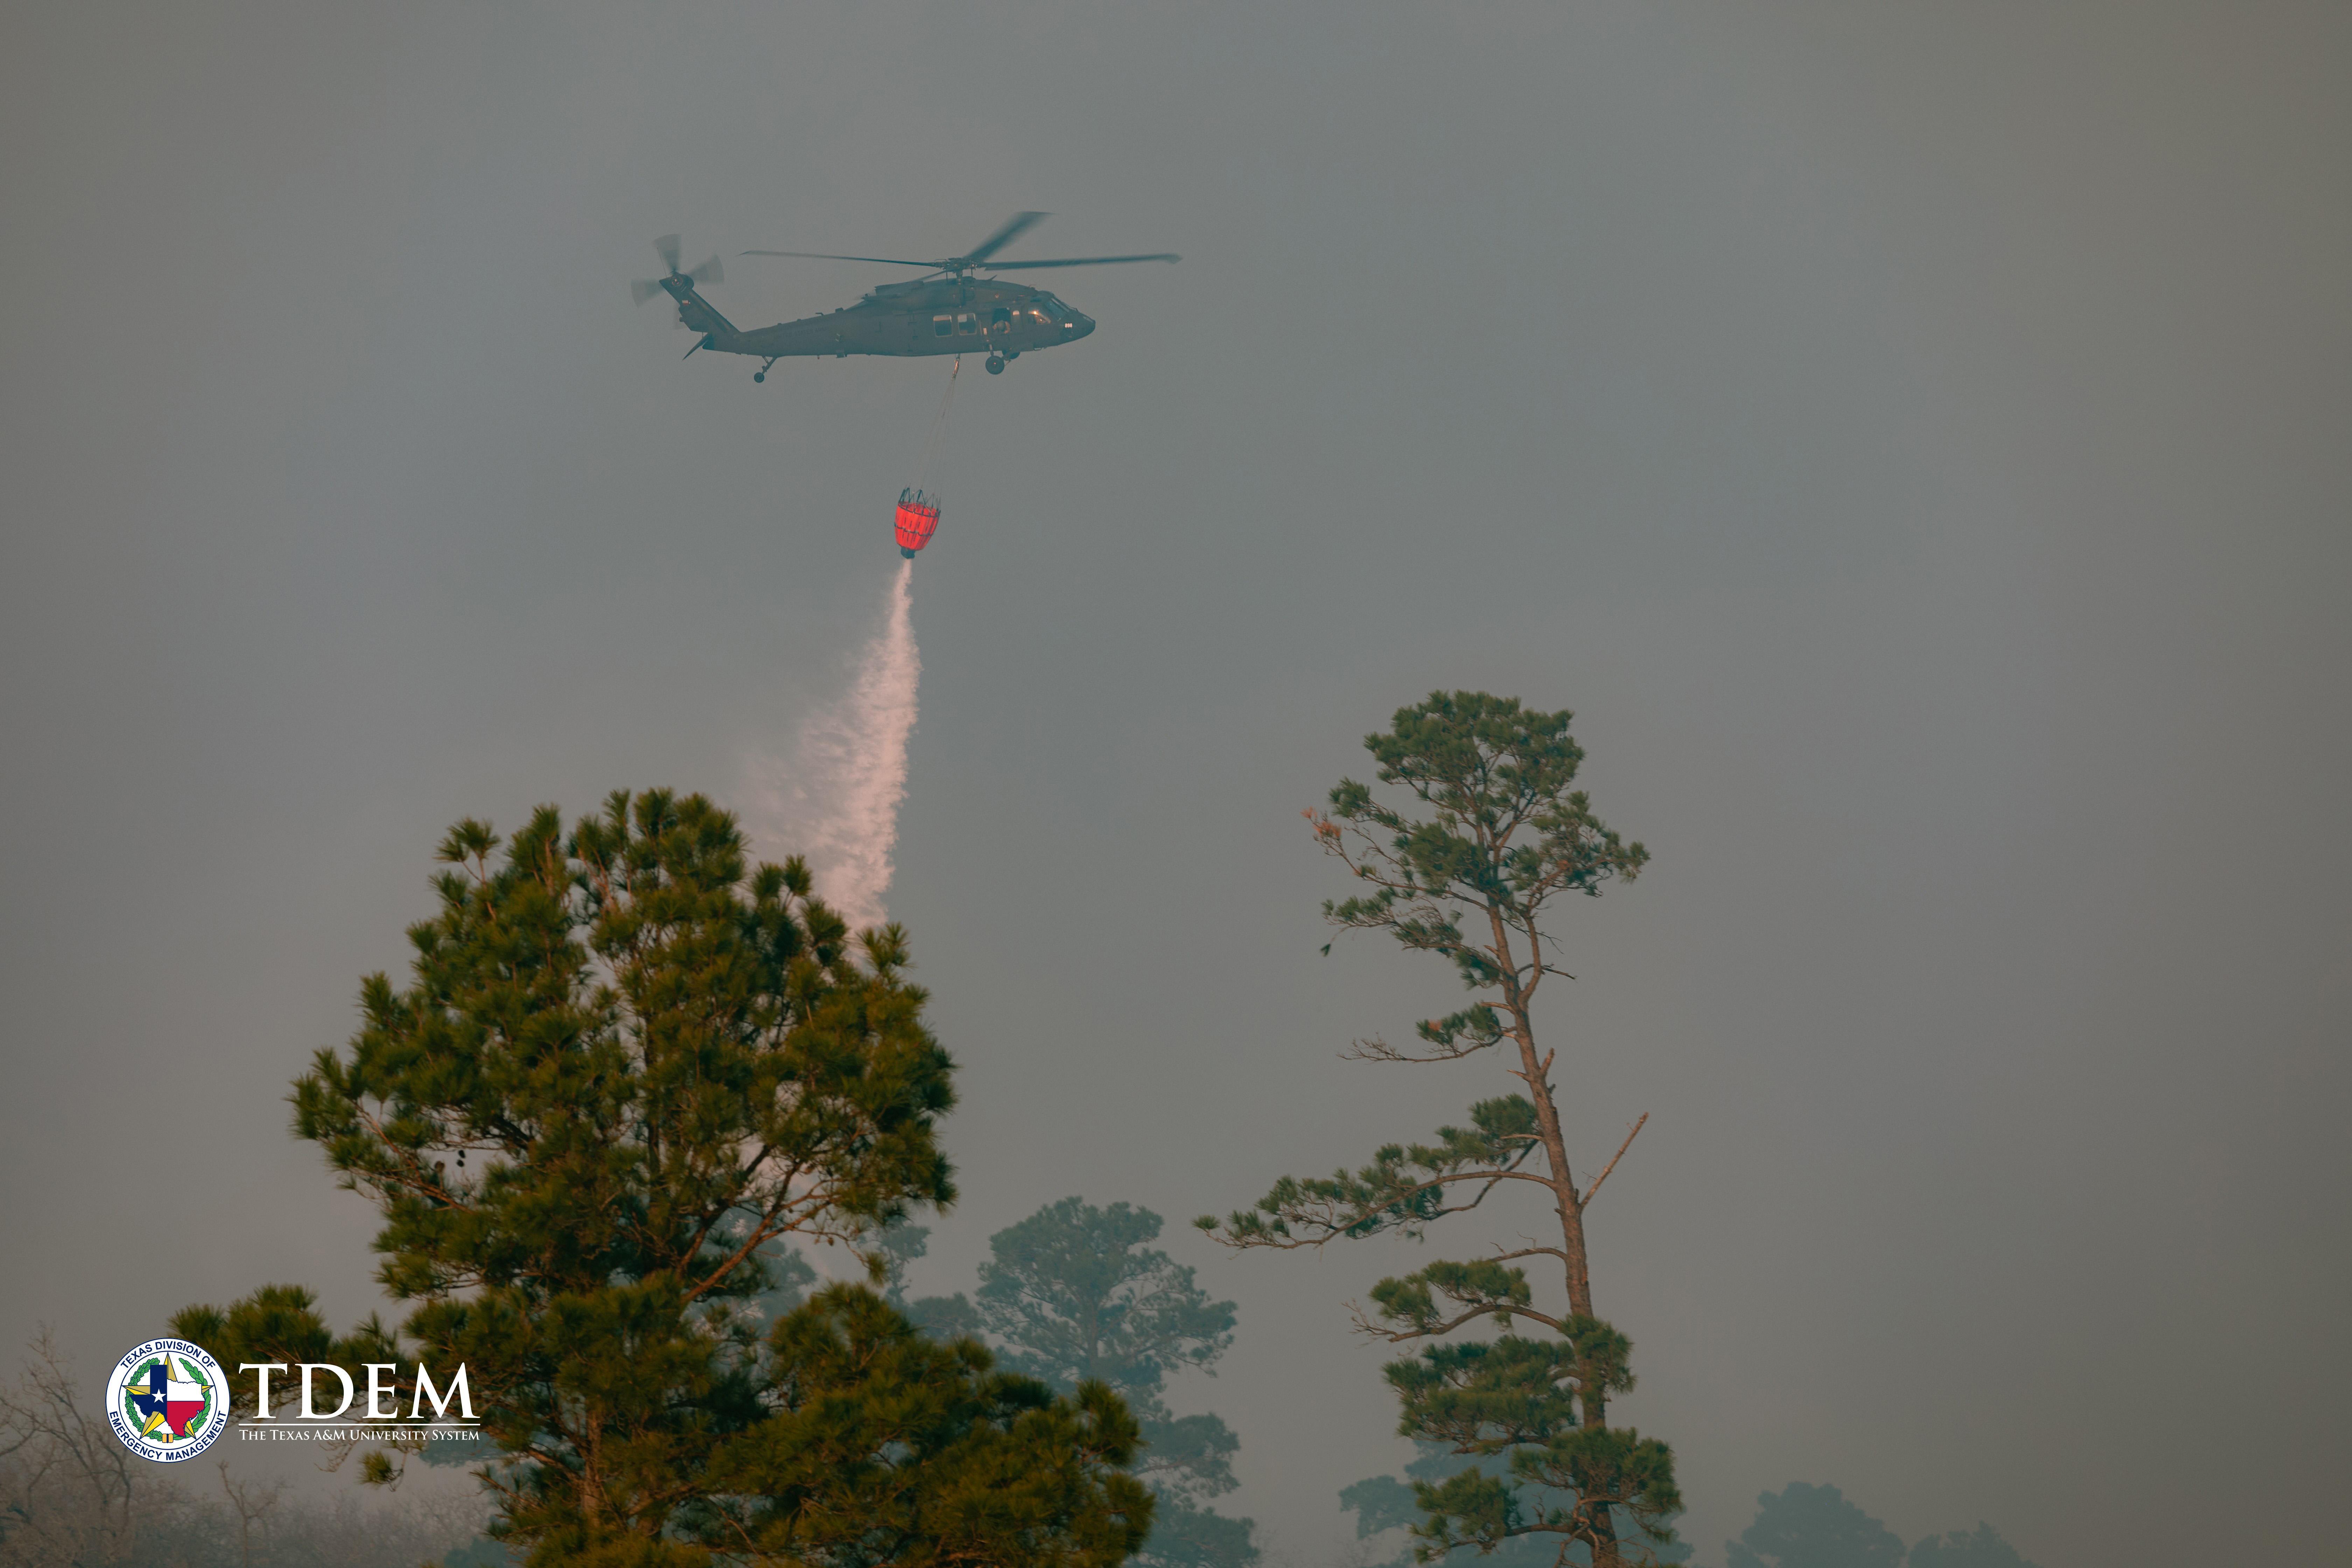 Picture shows a helicopter performing bucket drops in the background. Foreground is two pine trees.